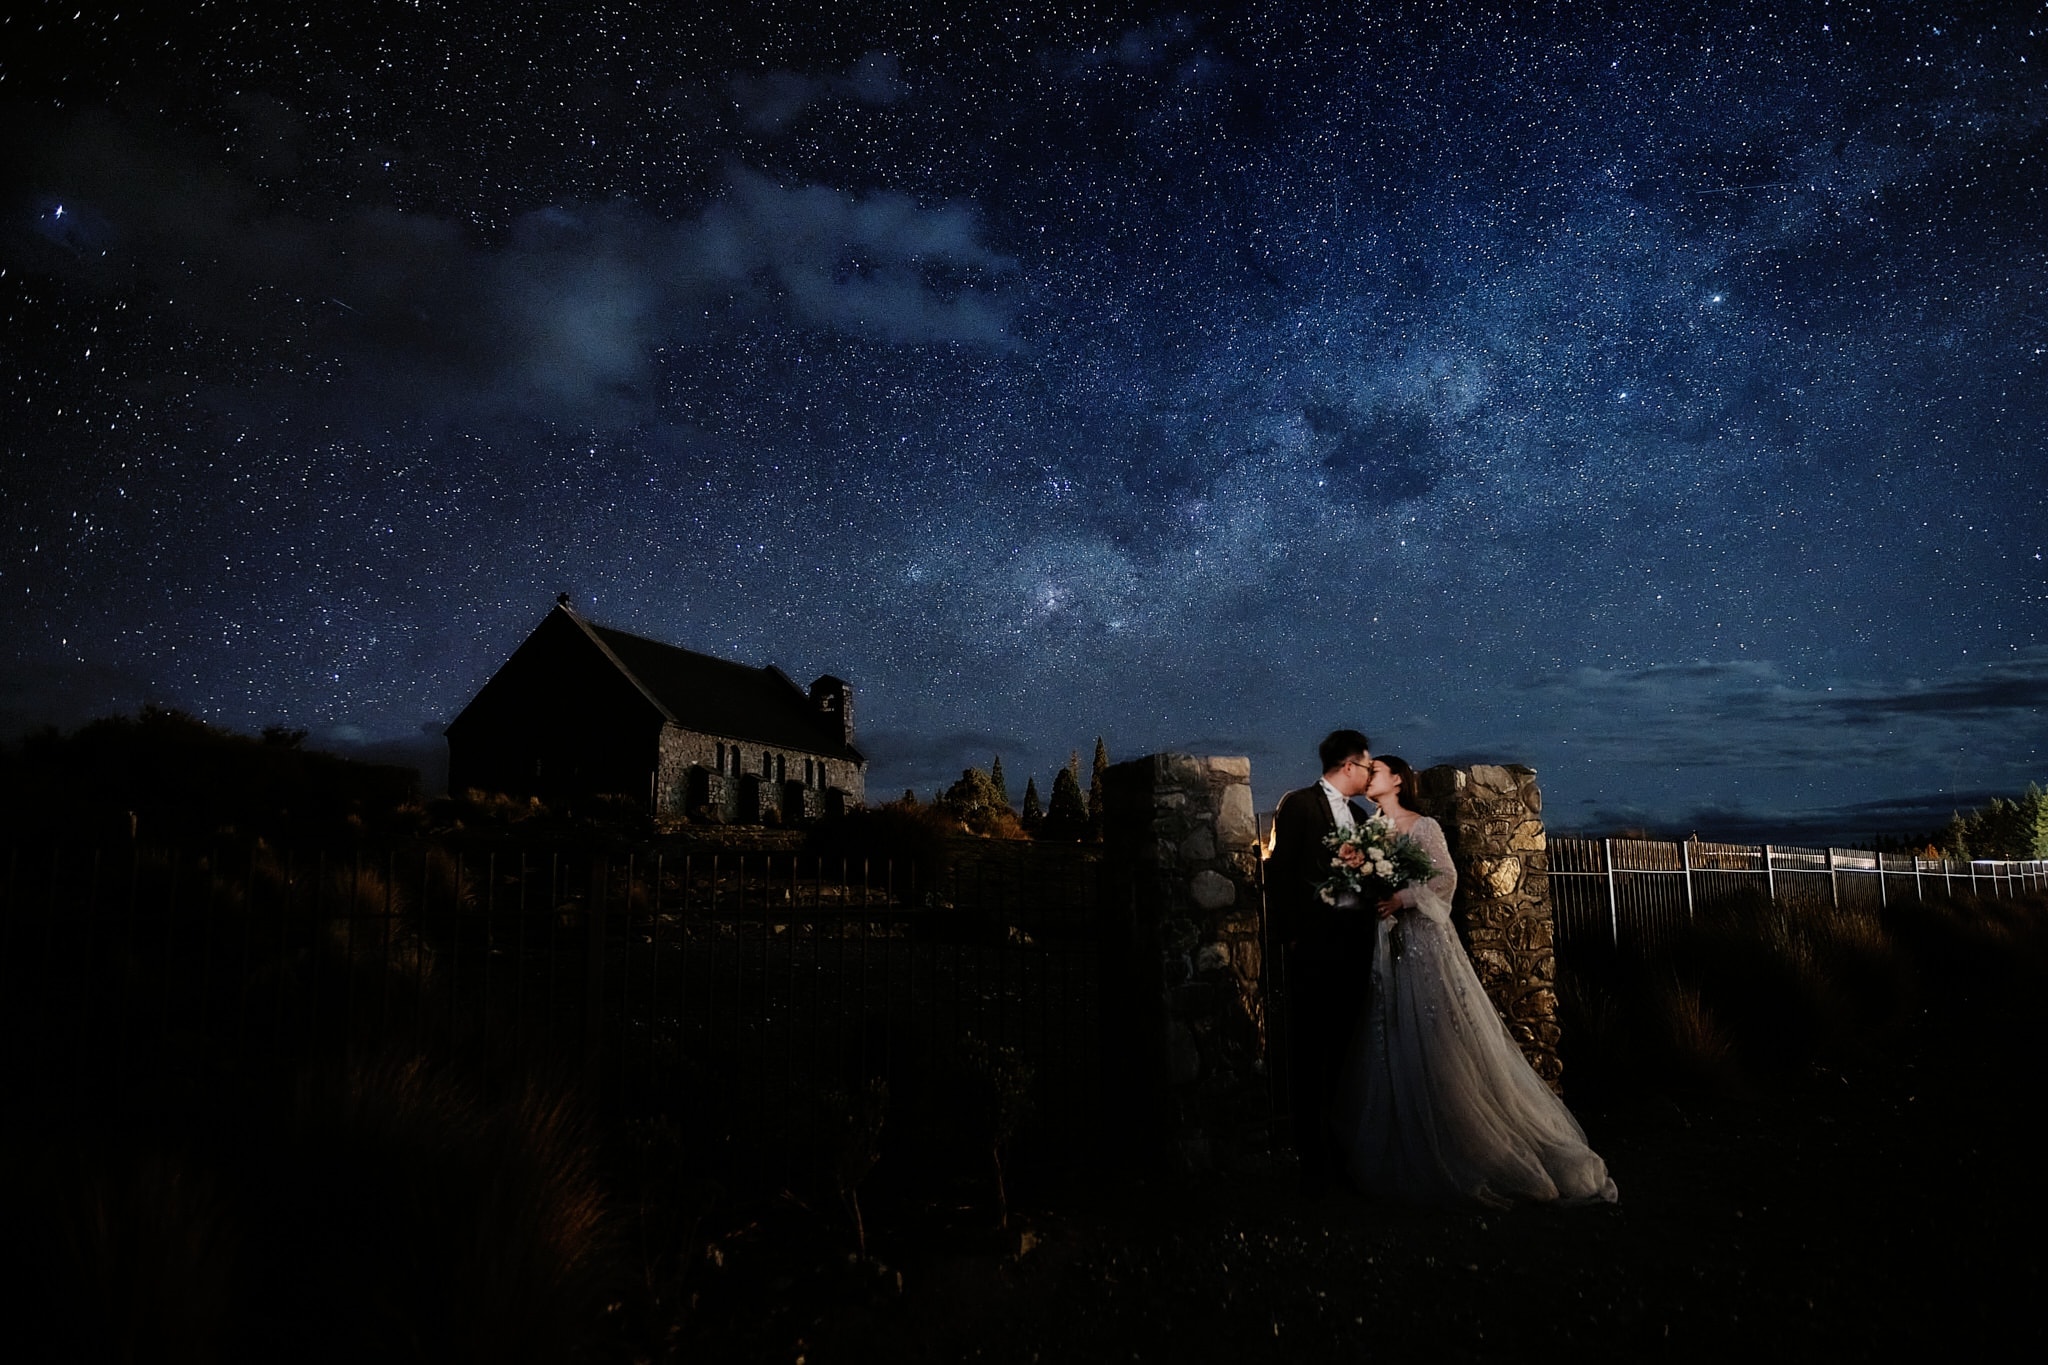 Queenstown New Zealand Elopement Wedding Photographer - A bride and groom share a passionate kiss under the starry night at their wedding in New Zealand, creating a captivating moment for their portfolio.